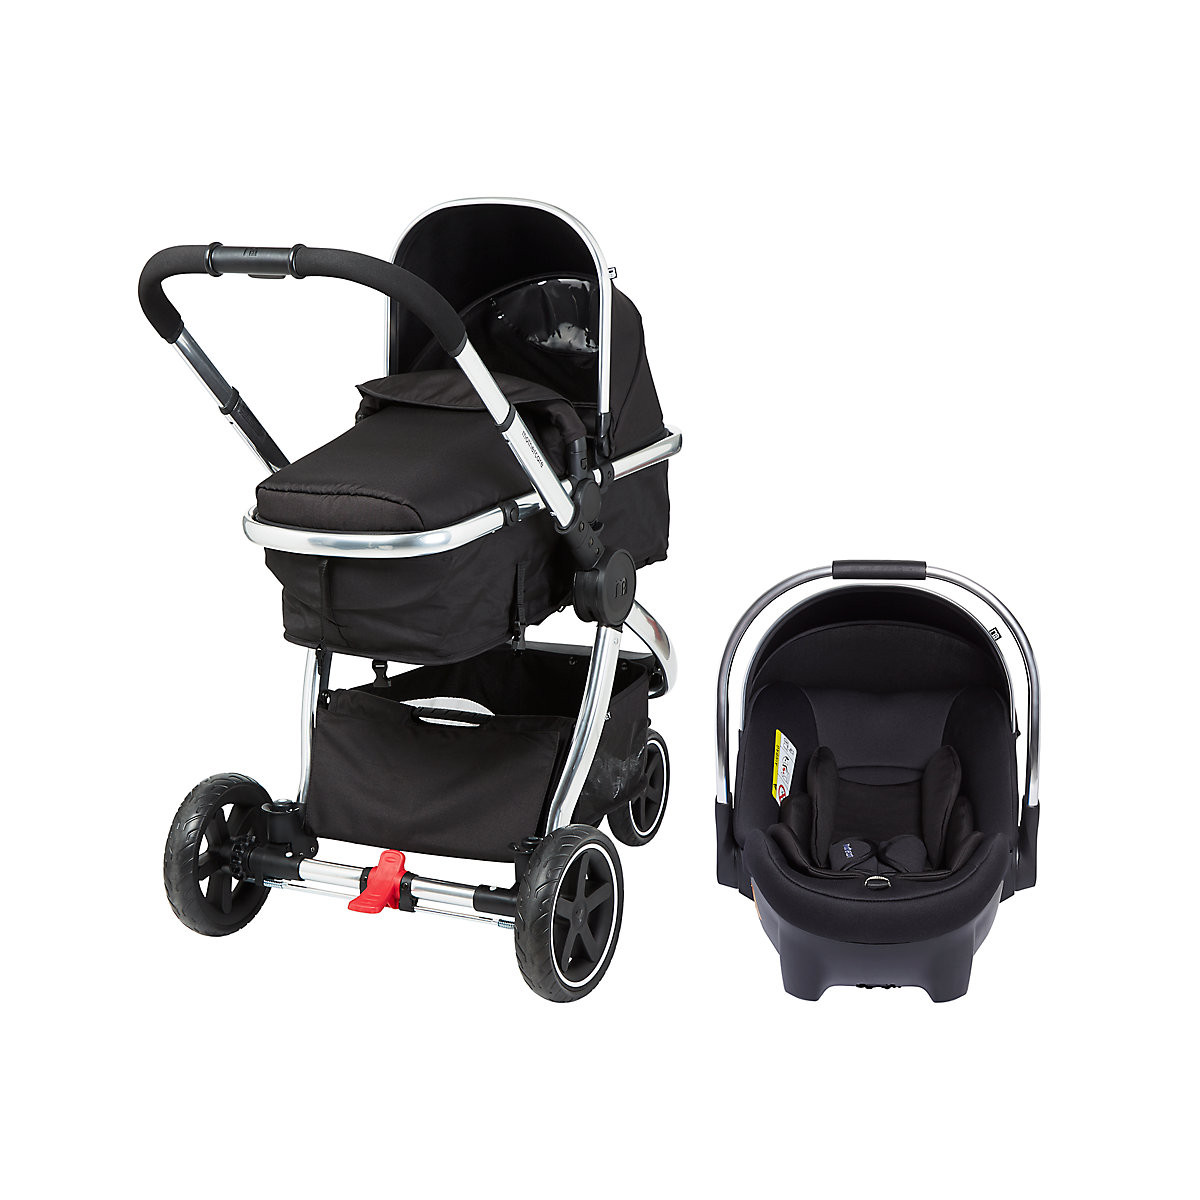 mothercare 3 wheel travel system